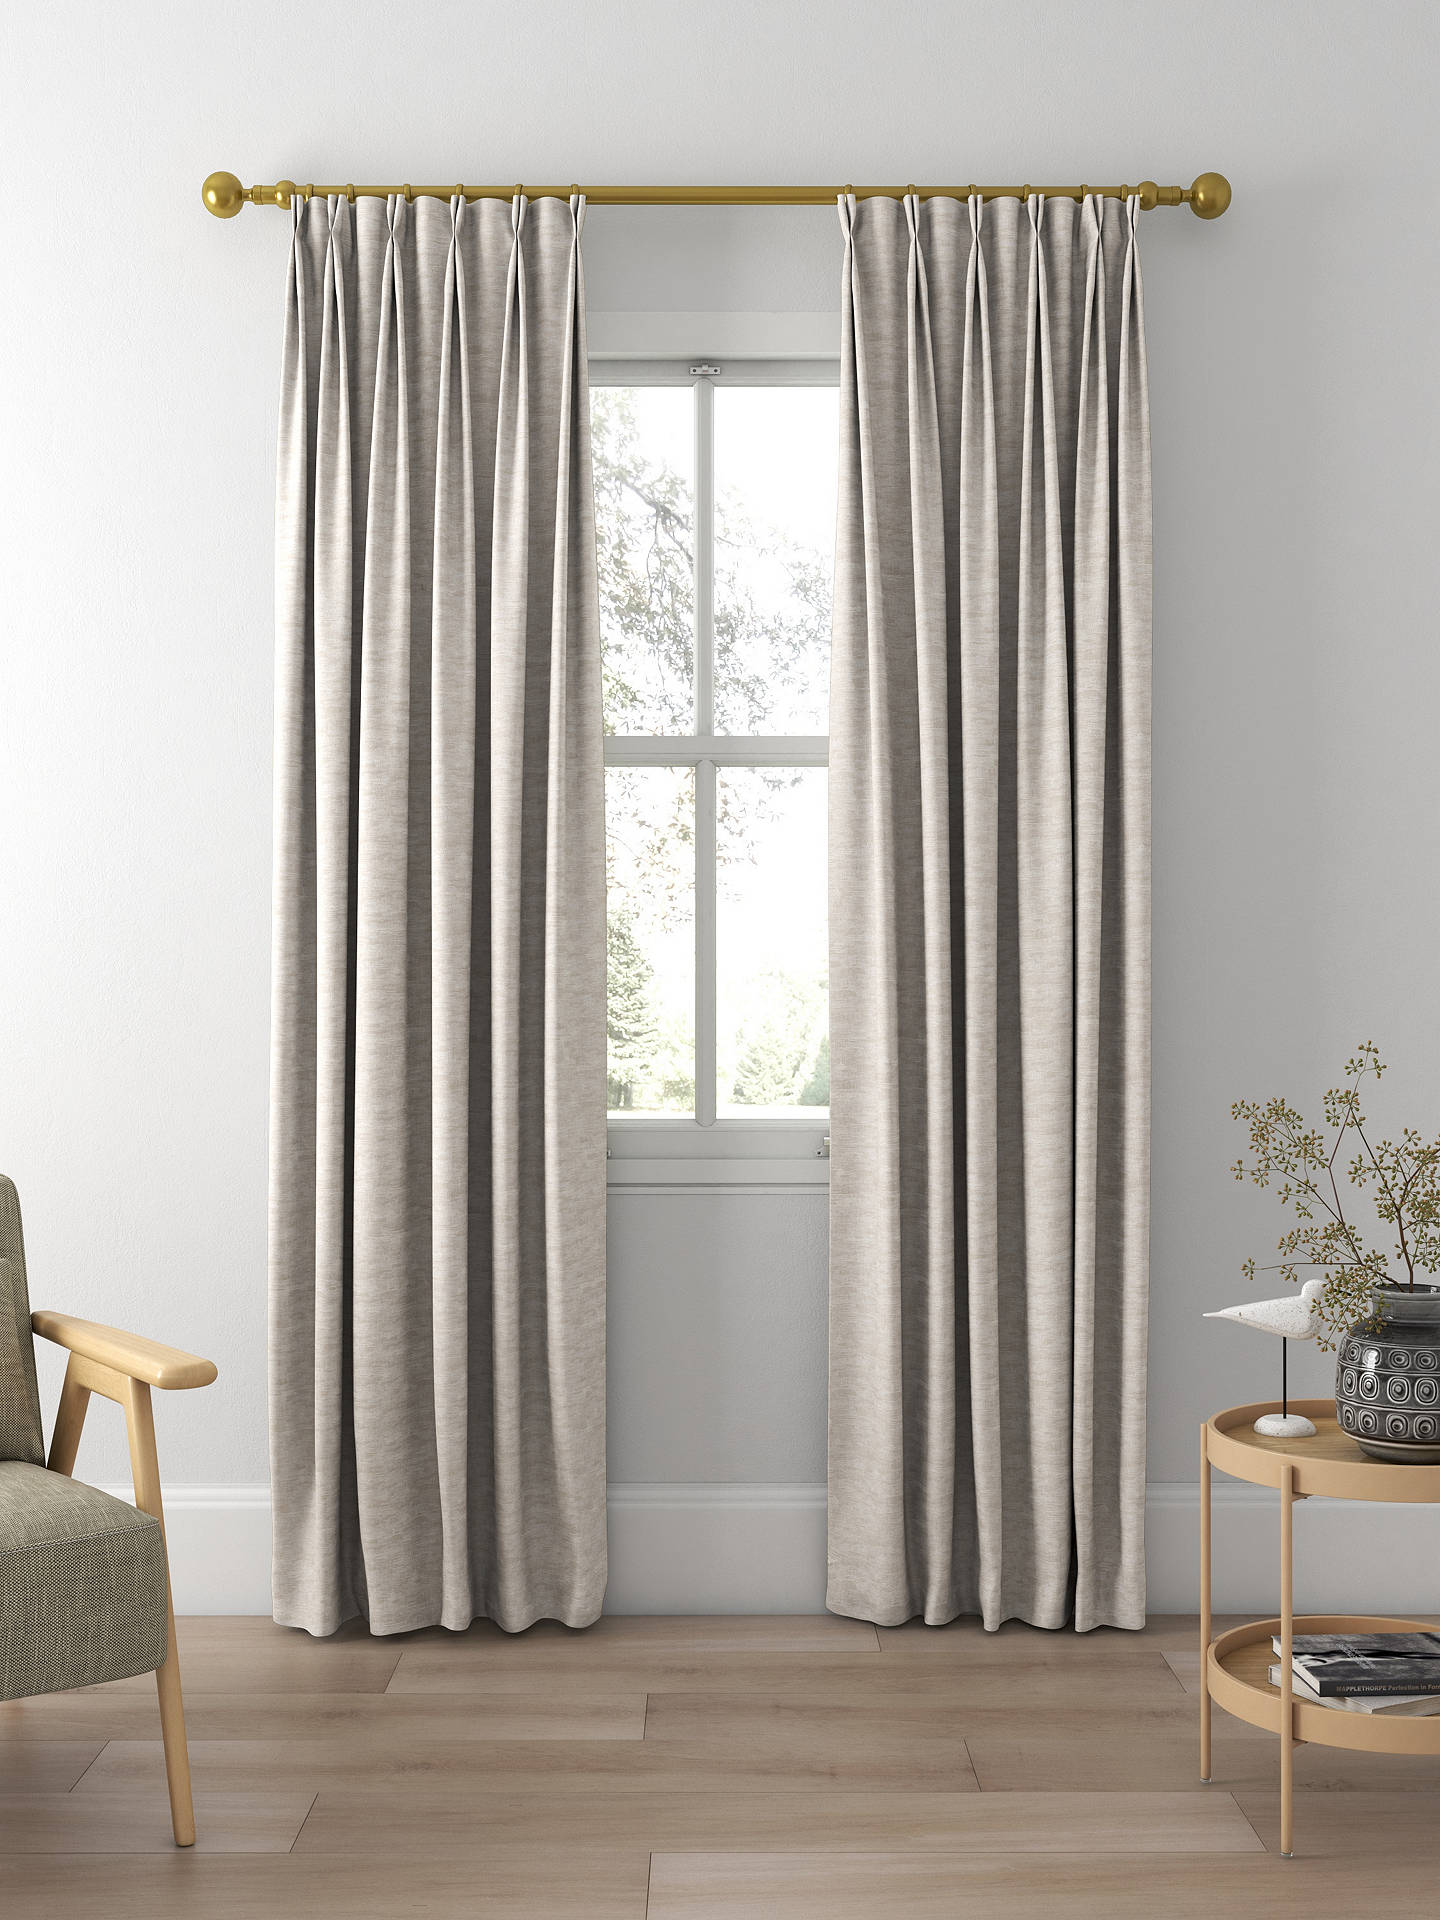 Laura Ashley Whinfell Made to Measure Curtains, Natural